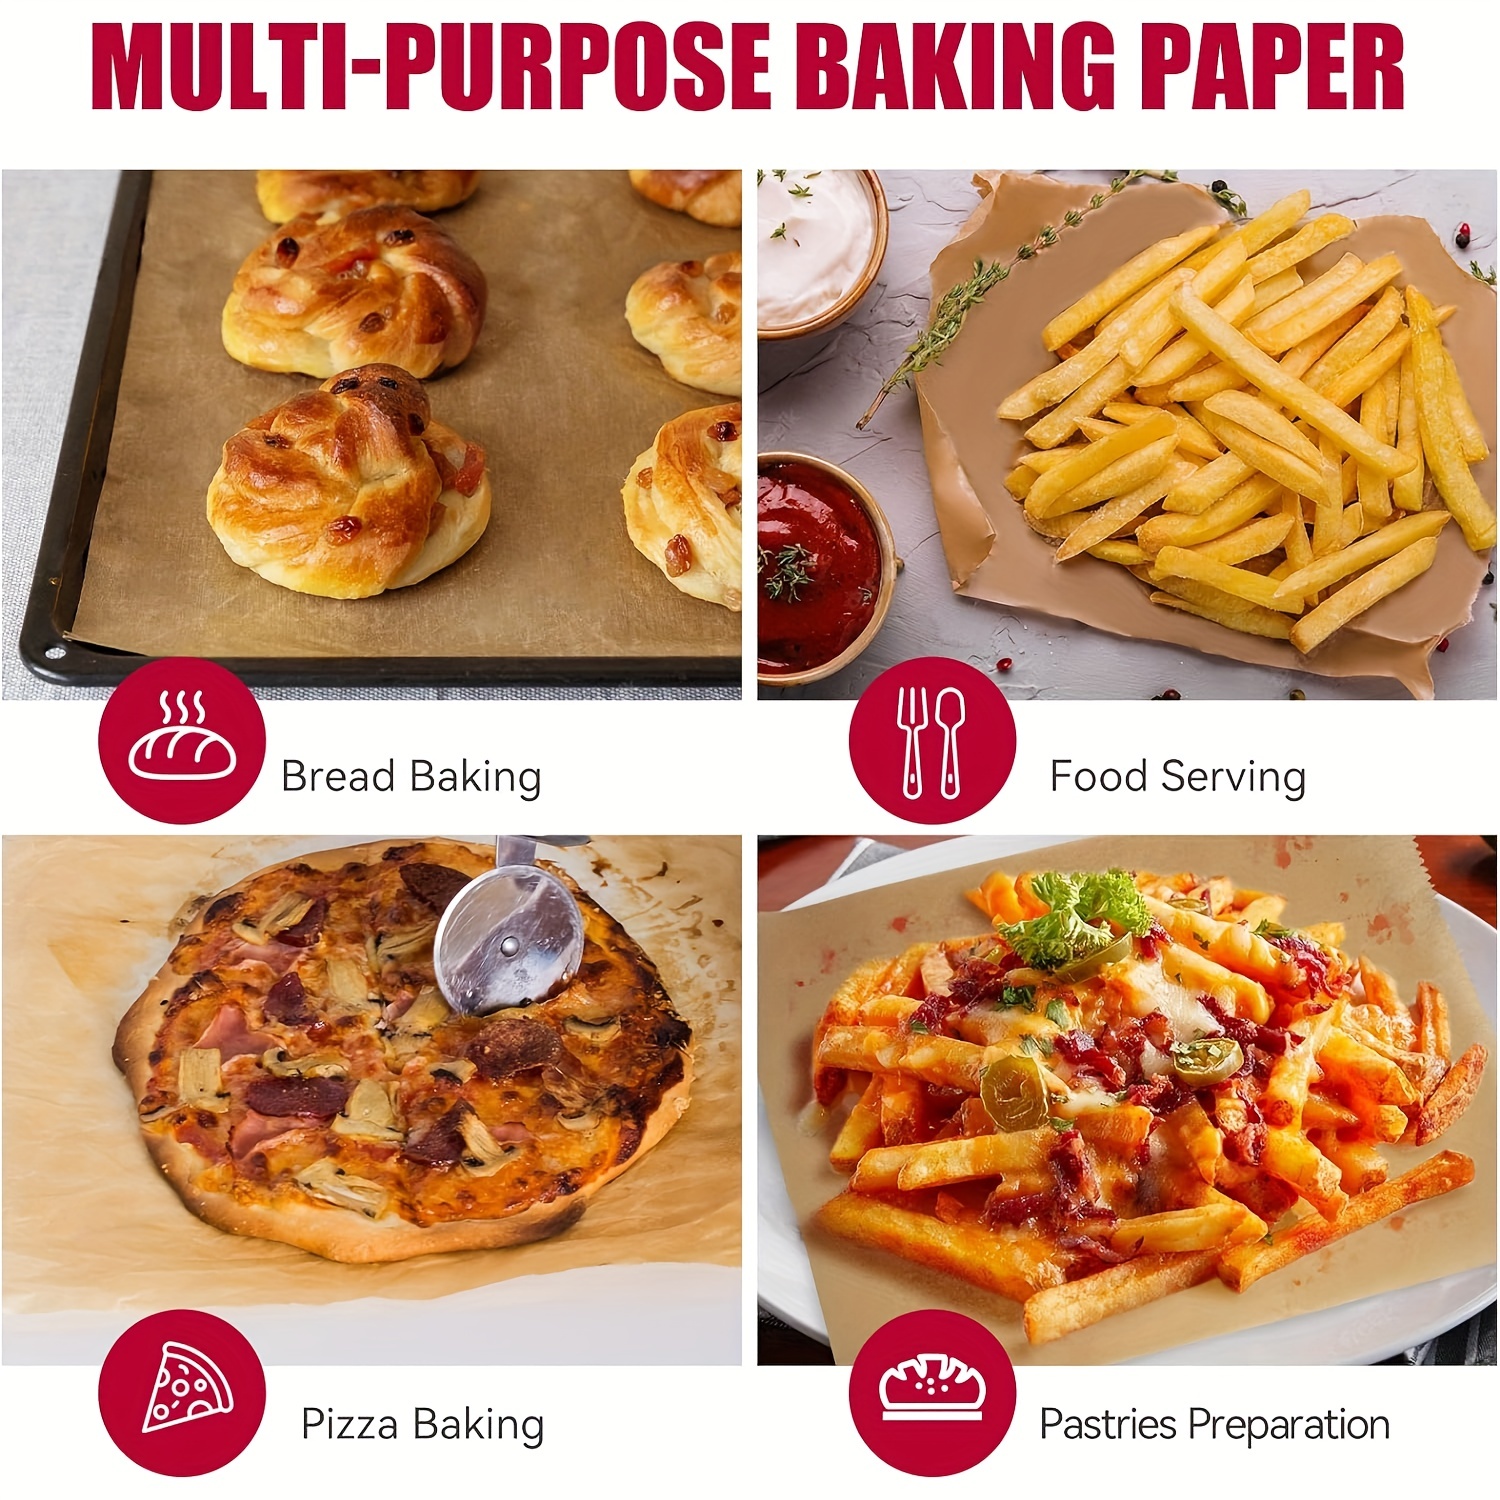 Roll Parchment Paper Nonstick Baking Pan Liner Oven Cooking Pizza